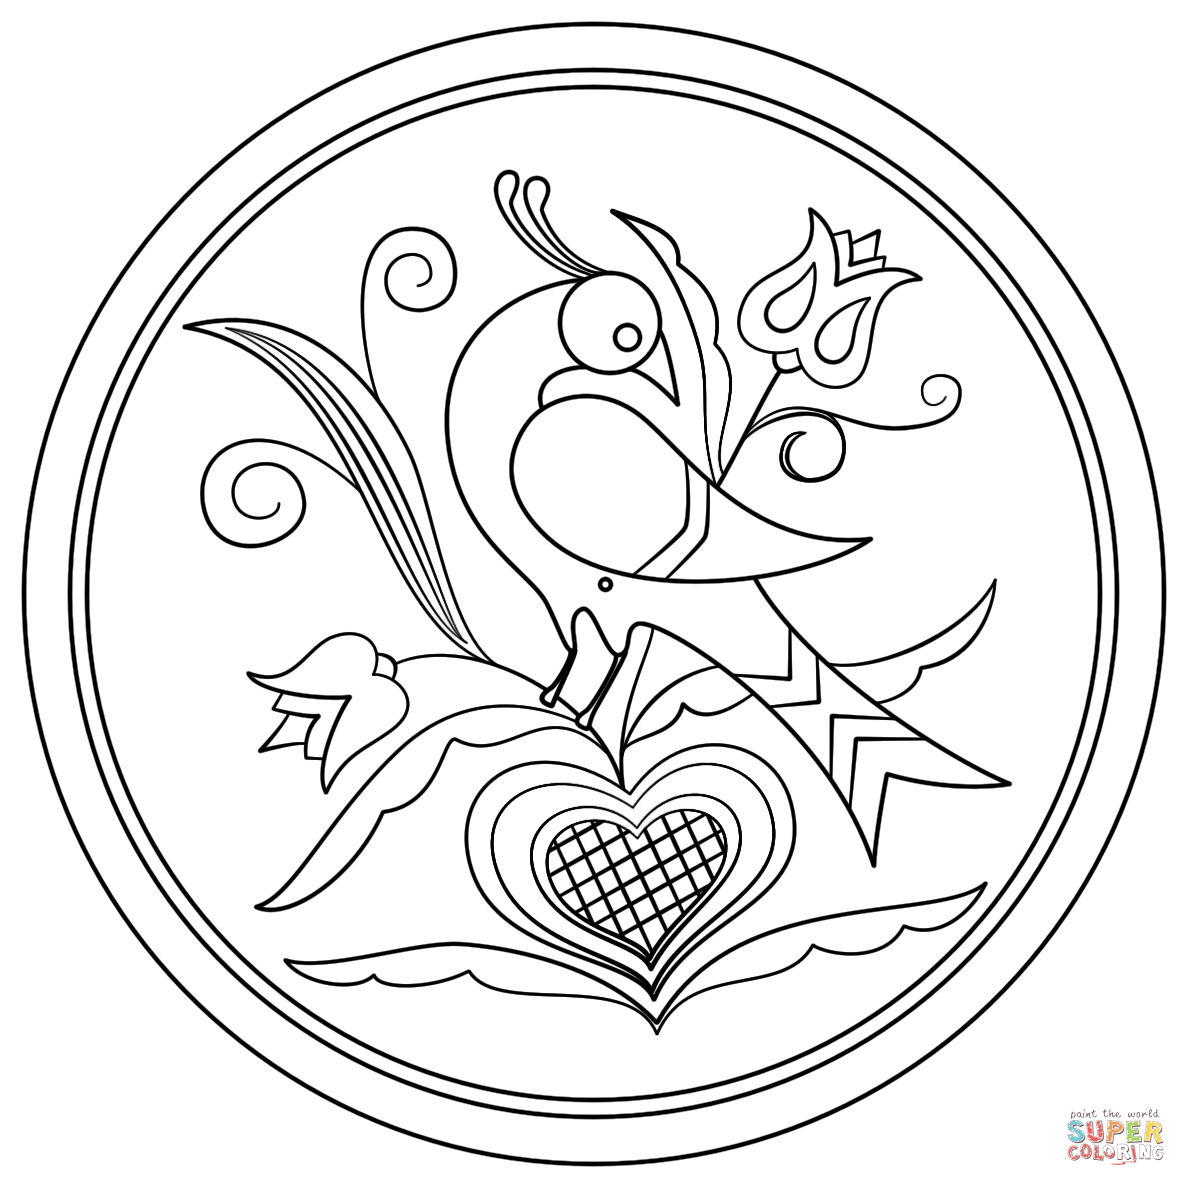 Hex sign with decorative bird coloring page free printable coloring pages